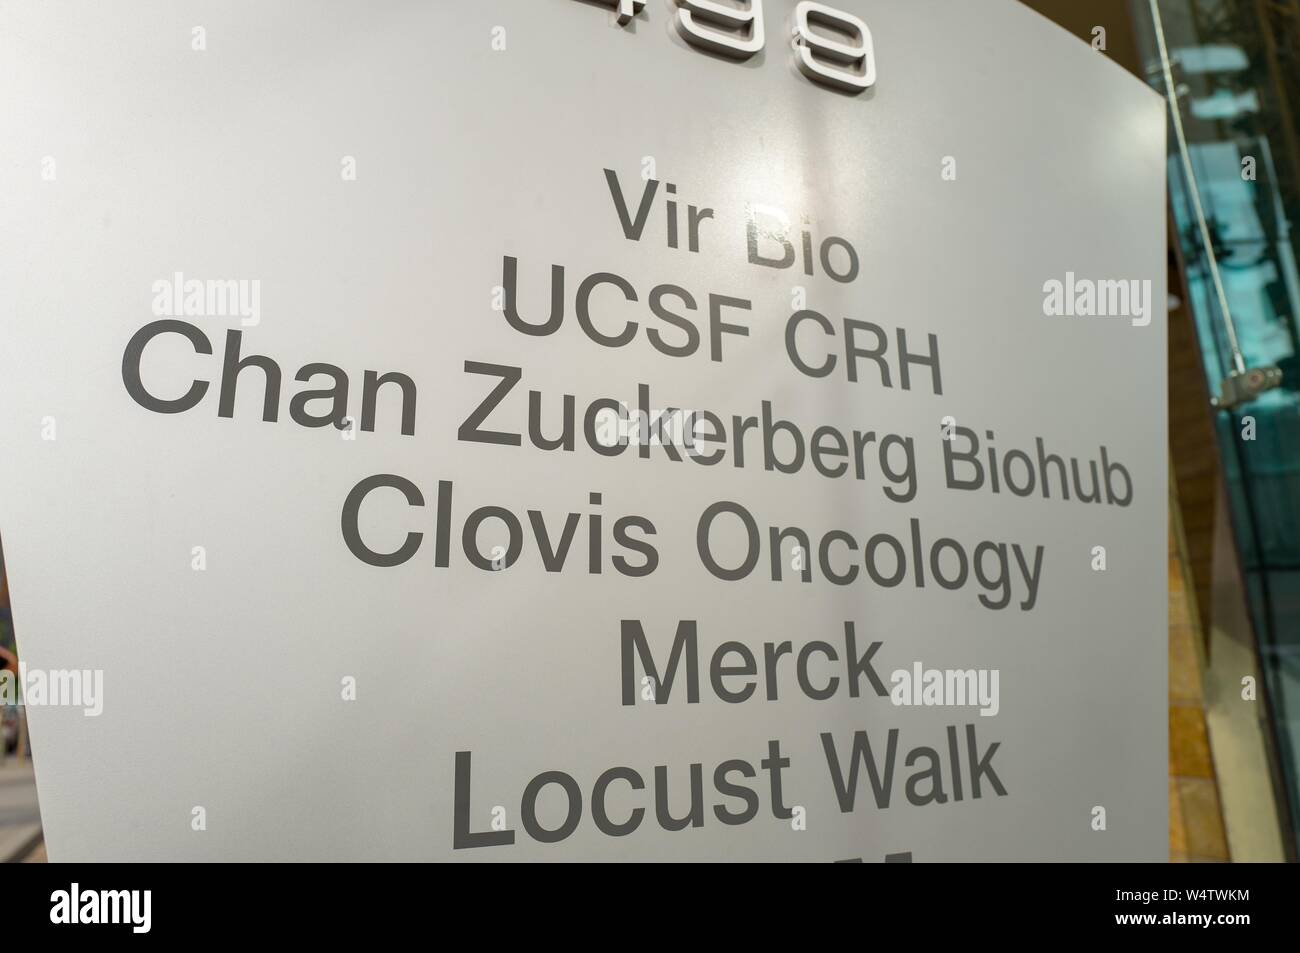 Close-up of sign outside the Chan Zuckerberg Biohub, a life sciences research center sponsored by Facebook founder Mark Zuckerberg, in the Mission Bay neighborhood of San Francisco, California, with logos for Vir Bio, UCSF, Clovis Oncology, Merck and Locust Walk also visible, November 13, 2018. () Stock Photo